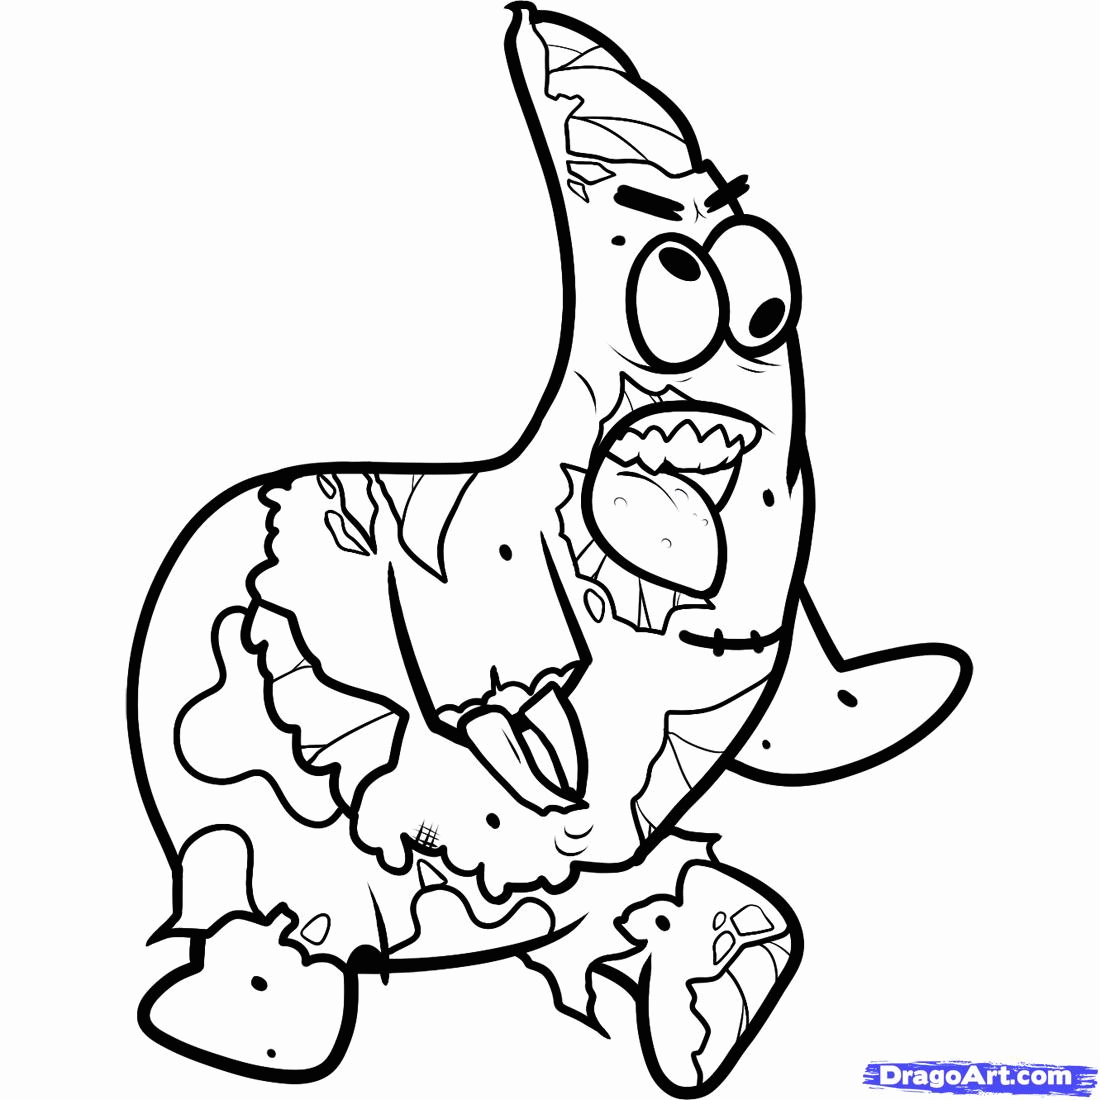 Free Cartoon Zombie Coloring Pages Download Free Cartoon Zombie Coloring Pages Png Images Free